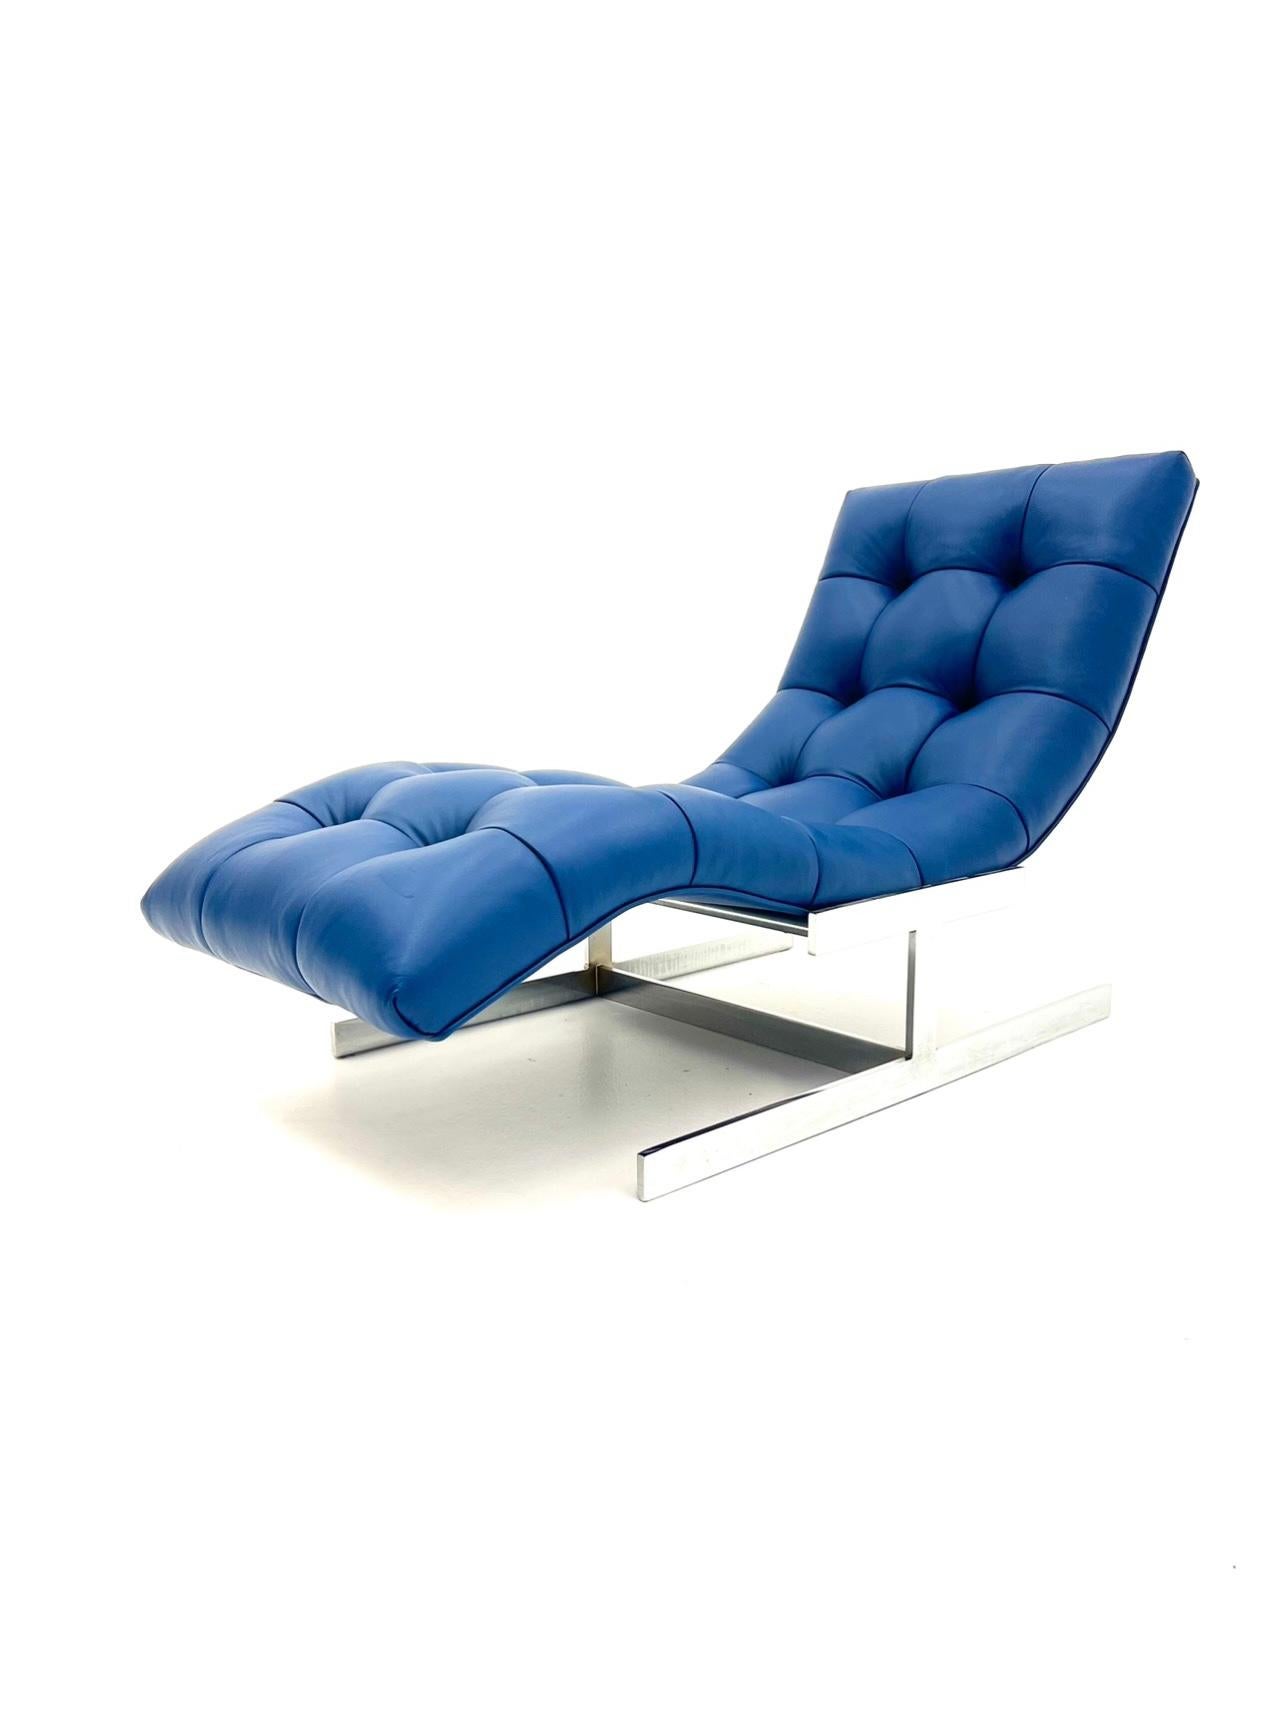 North American Milo Baughman Wave Chaise Lounge in Royal Blue Italian Leather